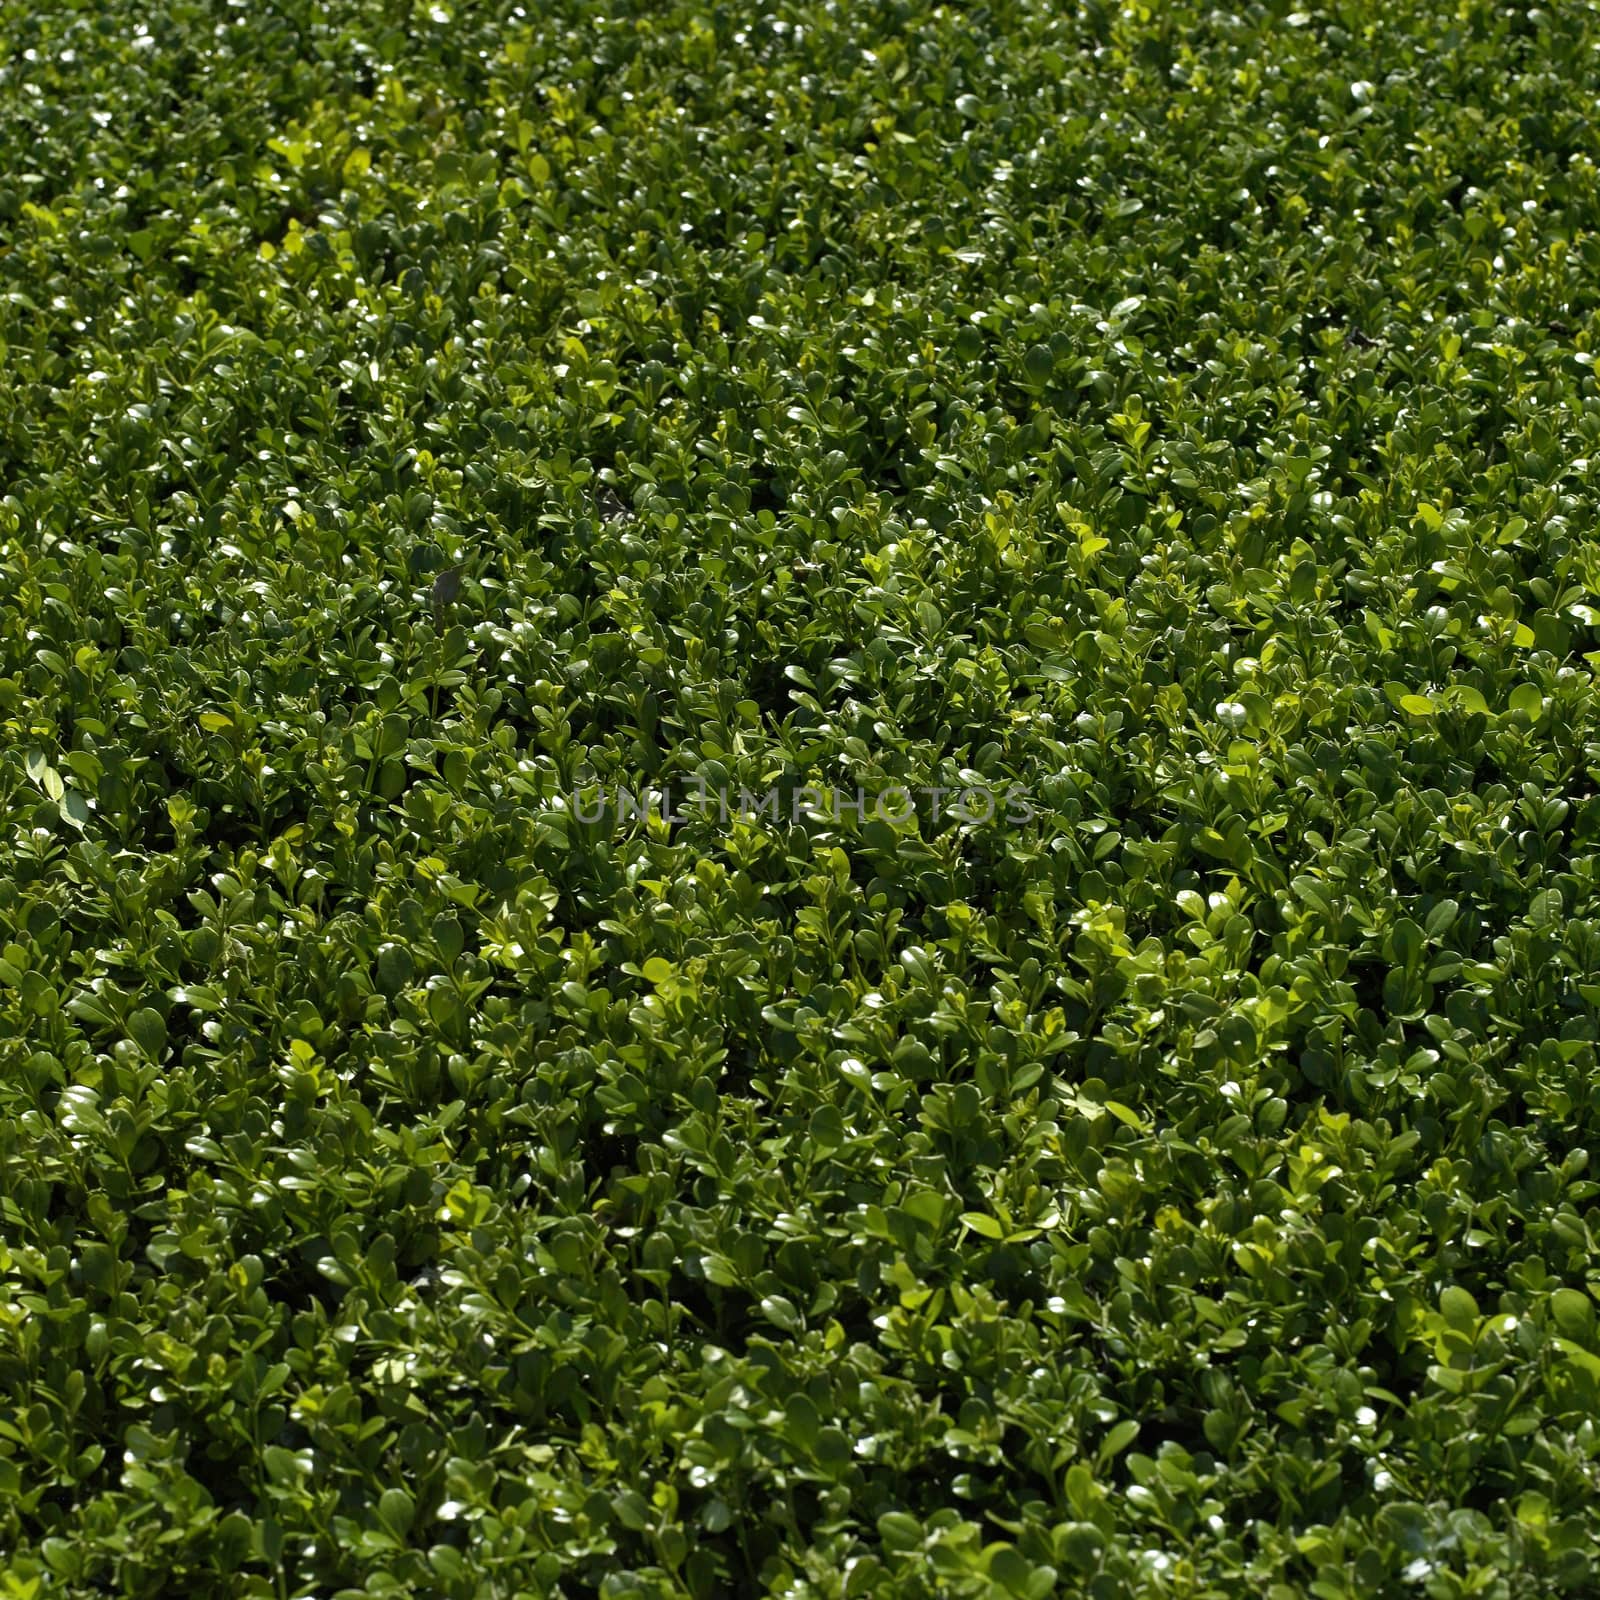 Green bushes manicured into a perfect hedge